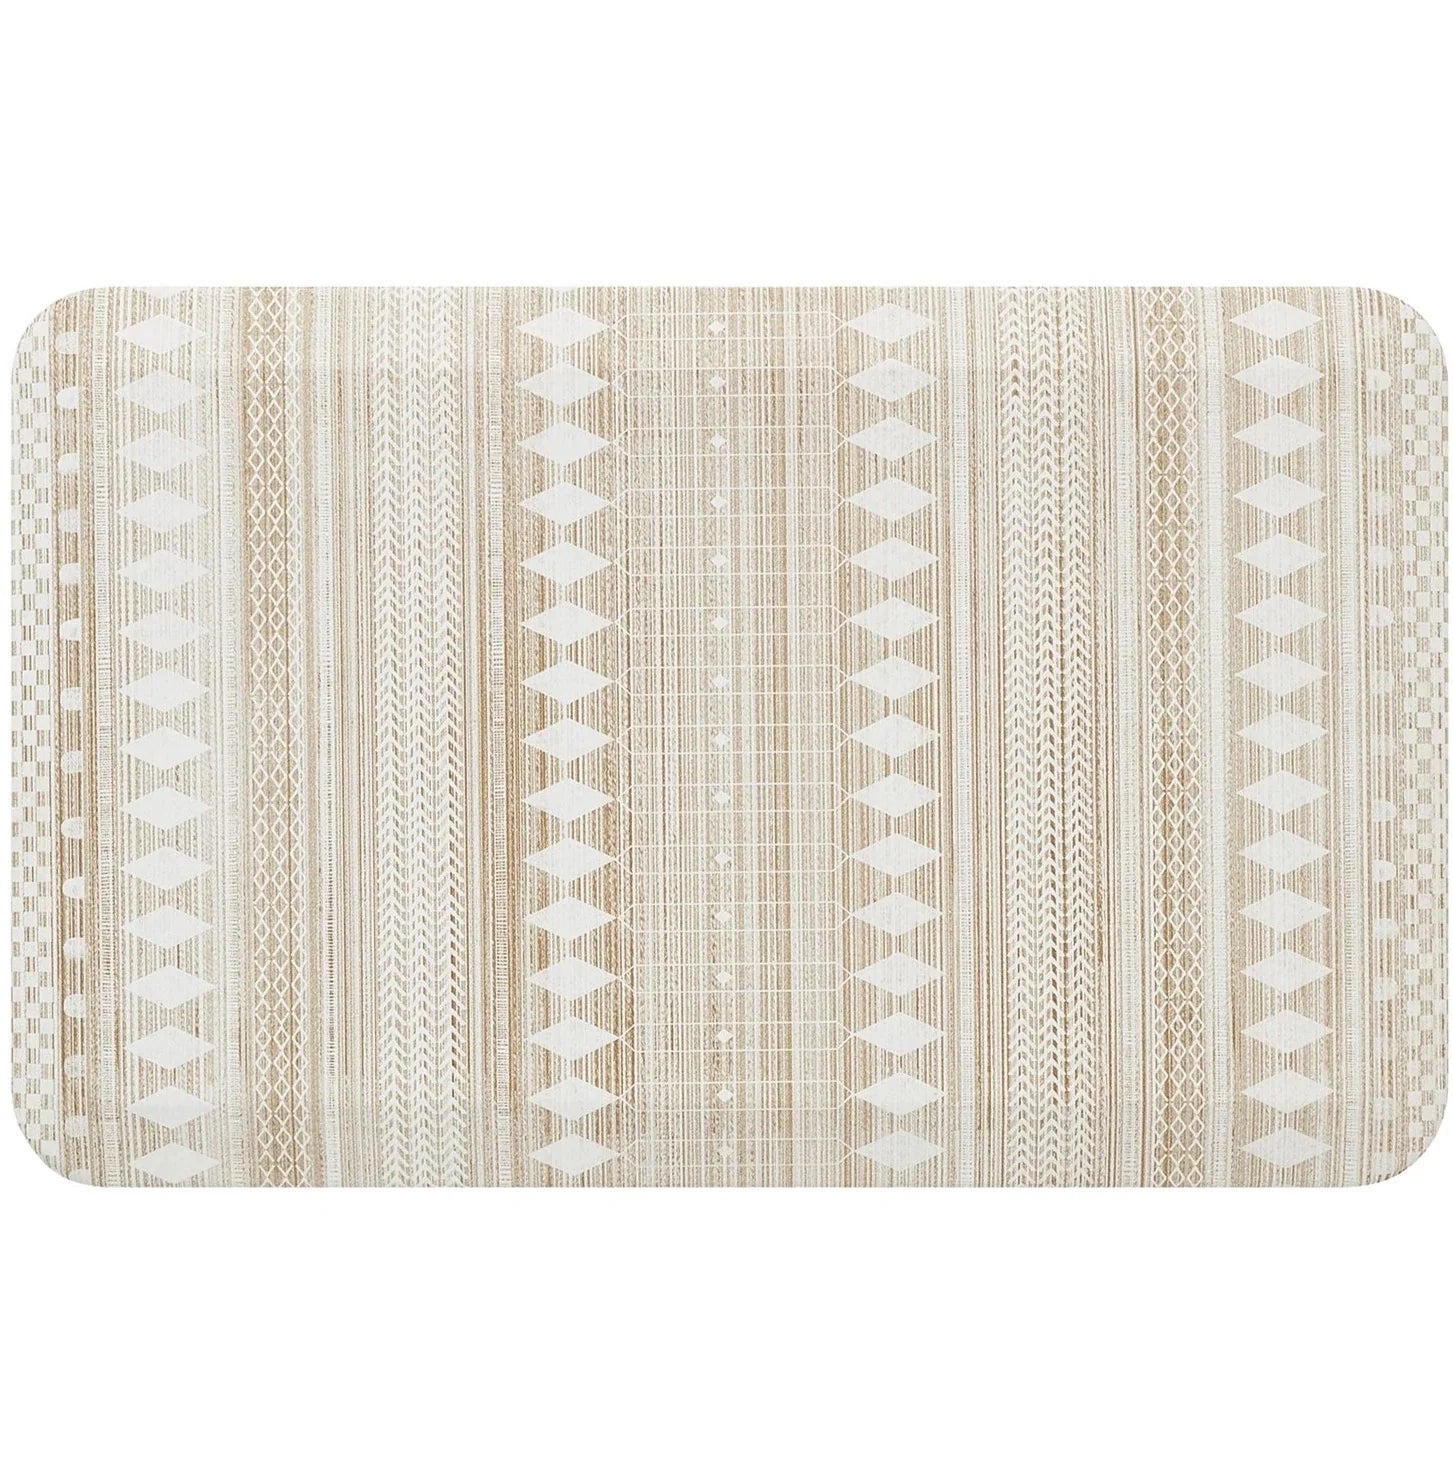 Nordique Dune beige and White Boho Nordic Print kitchen Mat in size 20x32